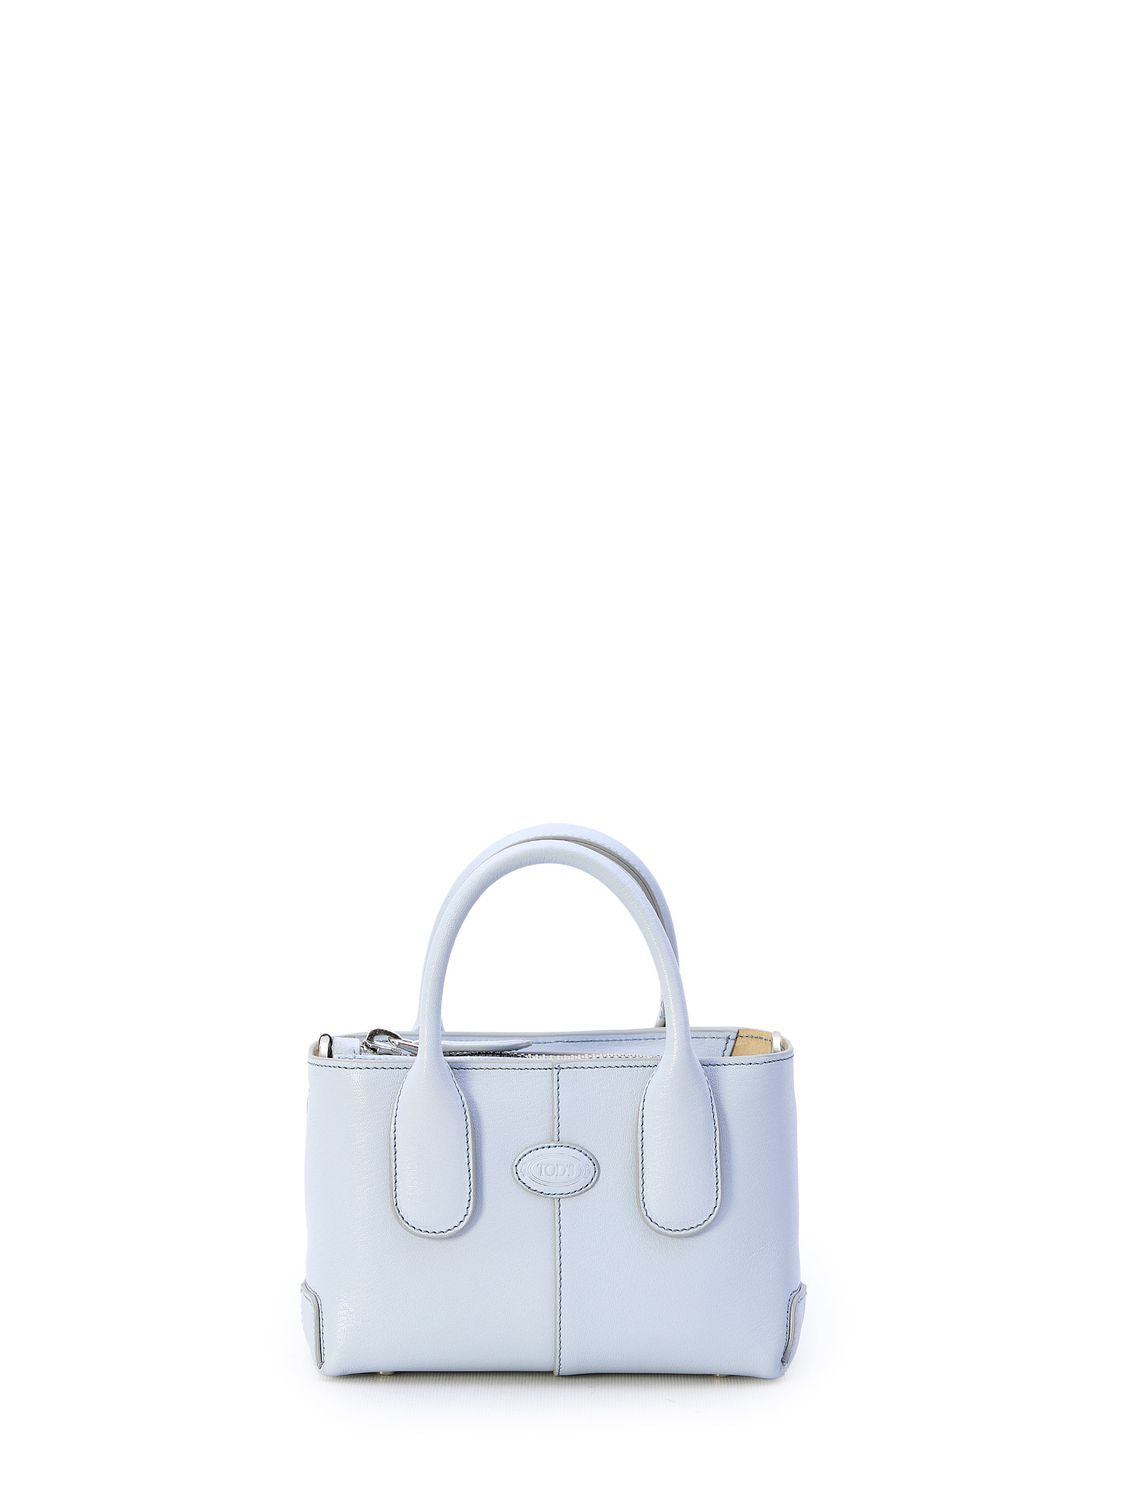 TOD'S Light Blue Mini Leather Handbag with Embossed Logo, Adjustable Strap, and Zip Closure - 20x12x7 cm